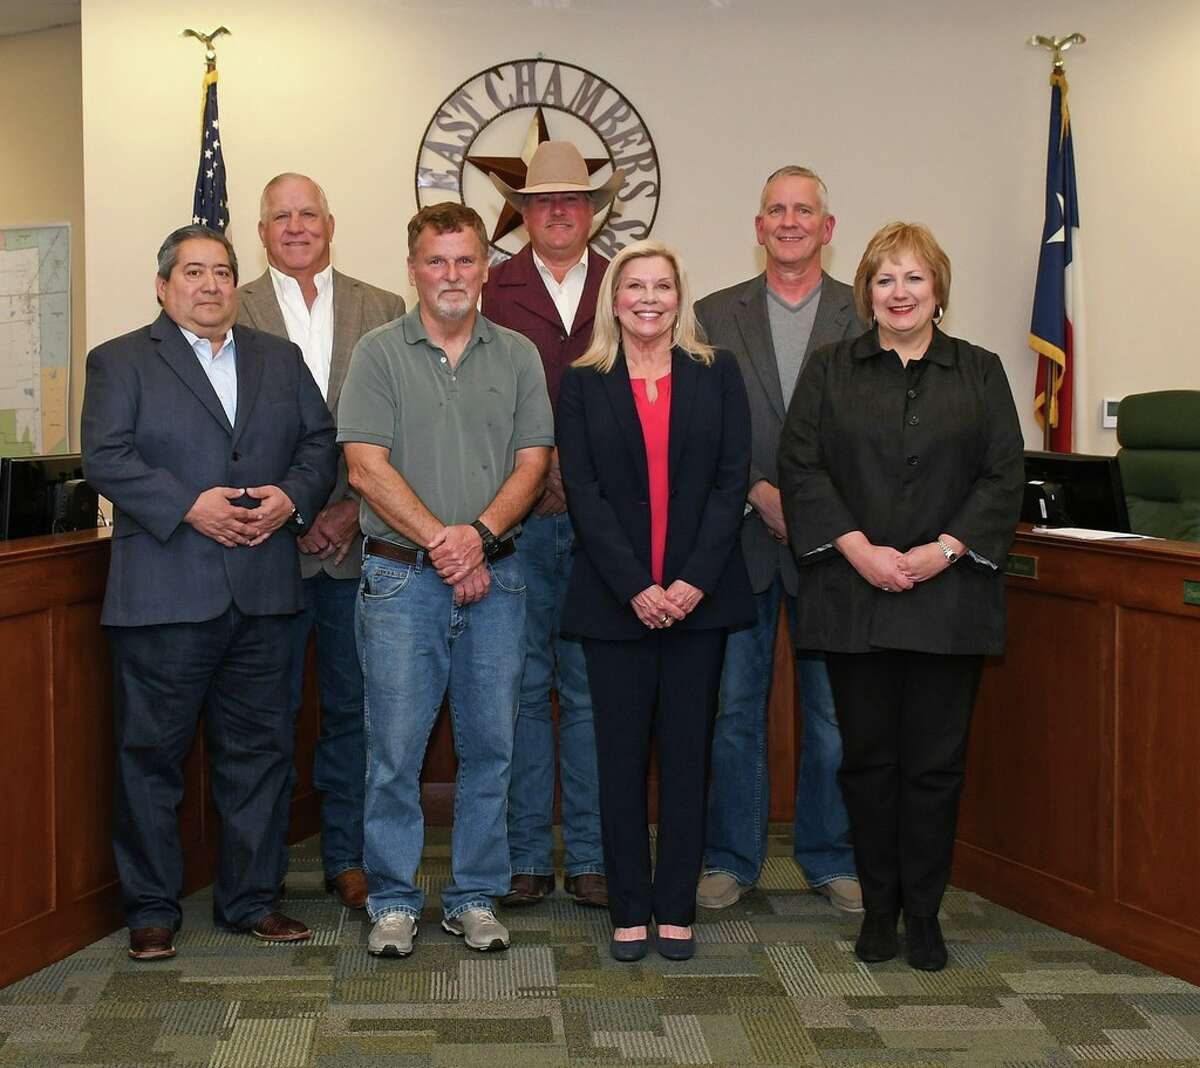 The East Chambers ISD school board. Top row, left to right: Board President Scott Jones, Board Secretary Taylor Wilcox and Kelley Touchet. Bottom row, left to right: Frank Abalos, Richard Lee, Board Vice President Lisa Bauer and Charlotte Edwards.